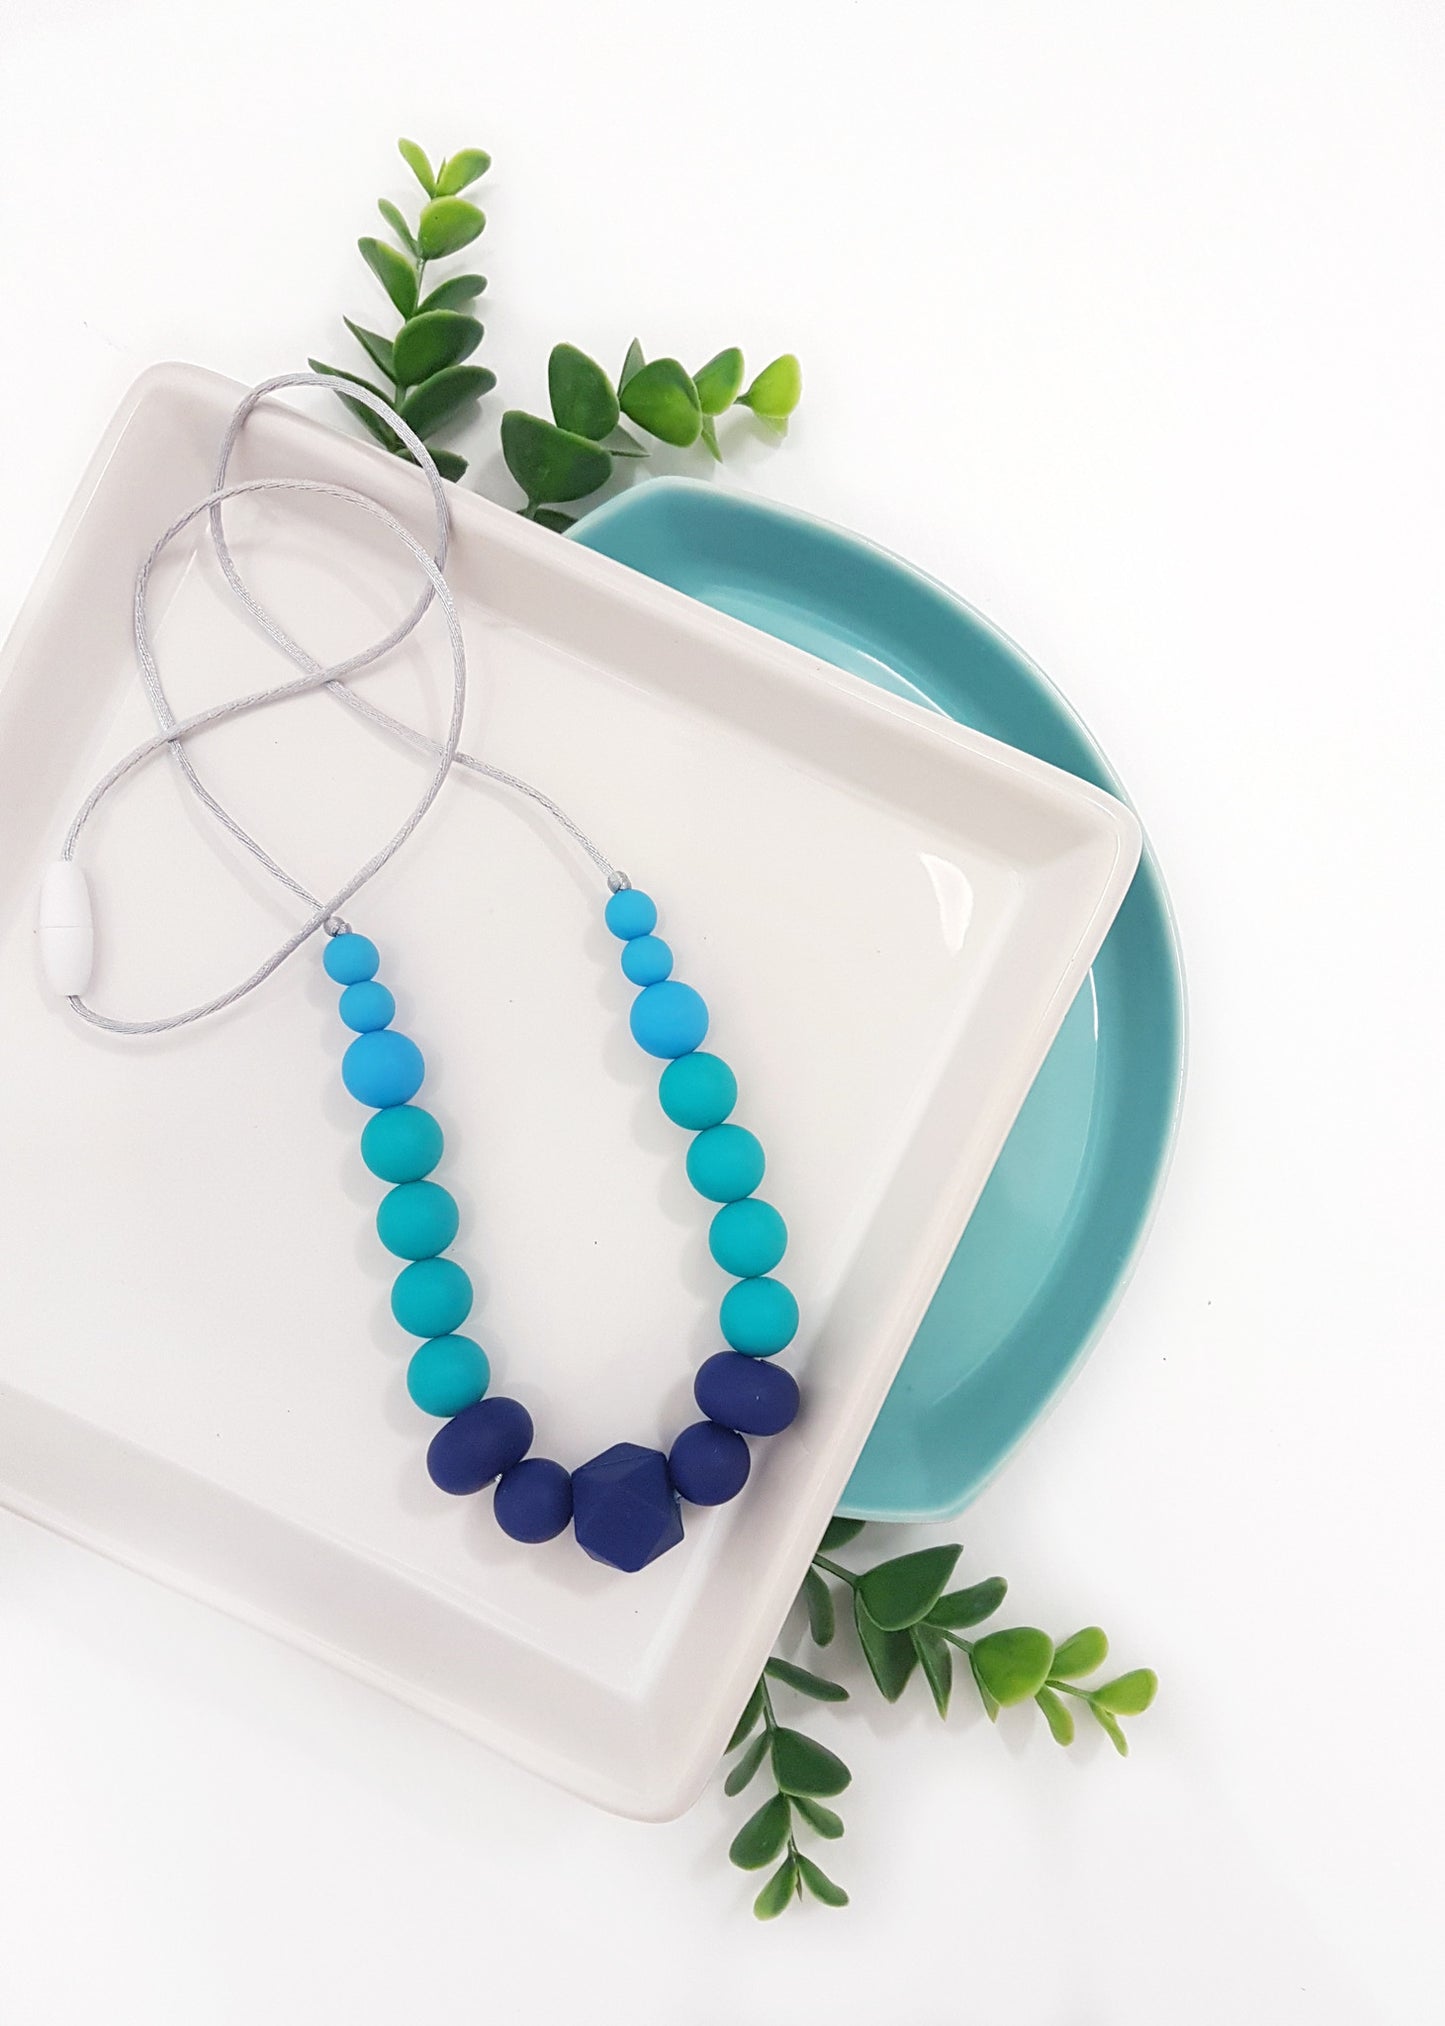 Humble Necklace - Bowerbird Creations